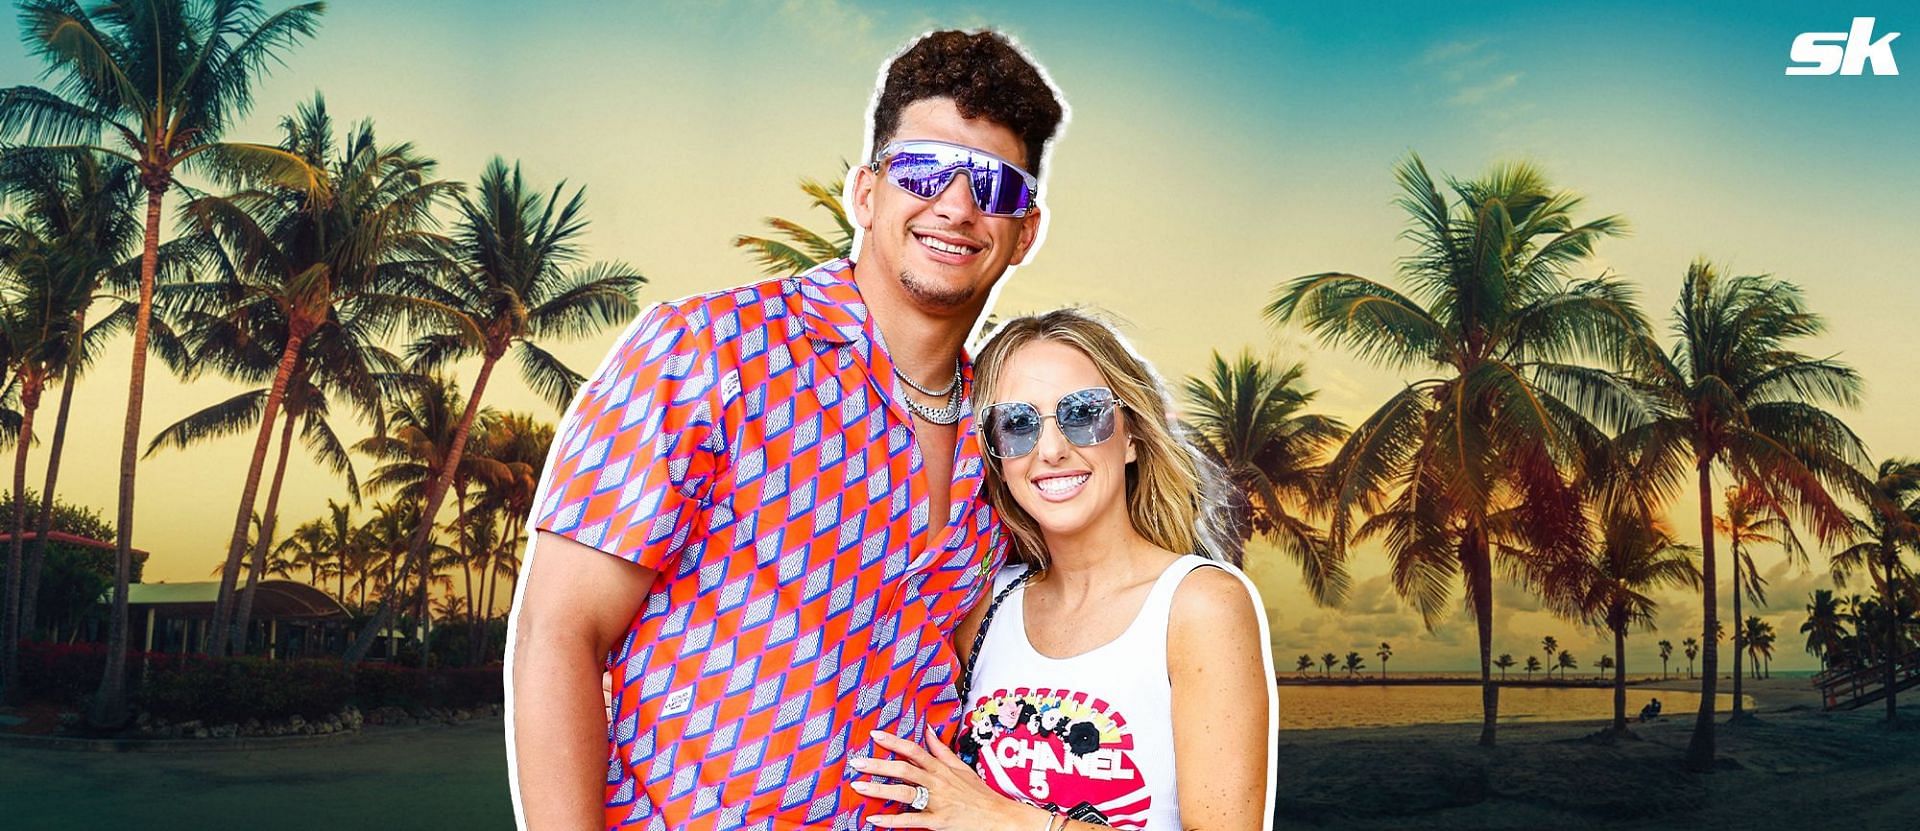 Patrick and Brittany Mahomes spent the weekend in Miami watching the Formula 1 Grand Prix.